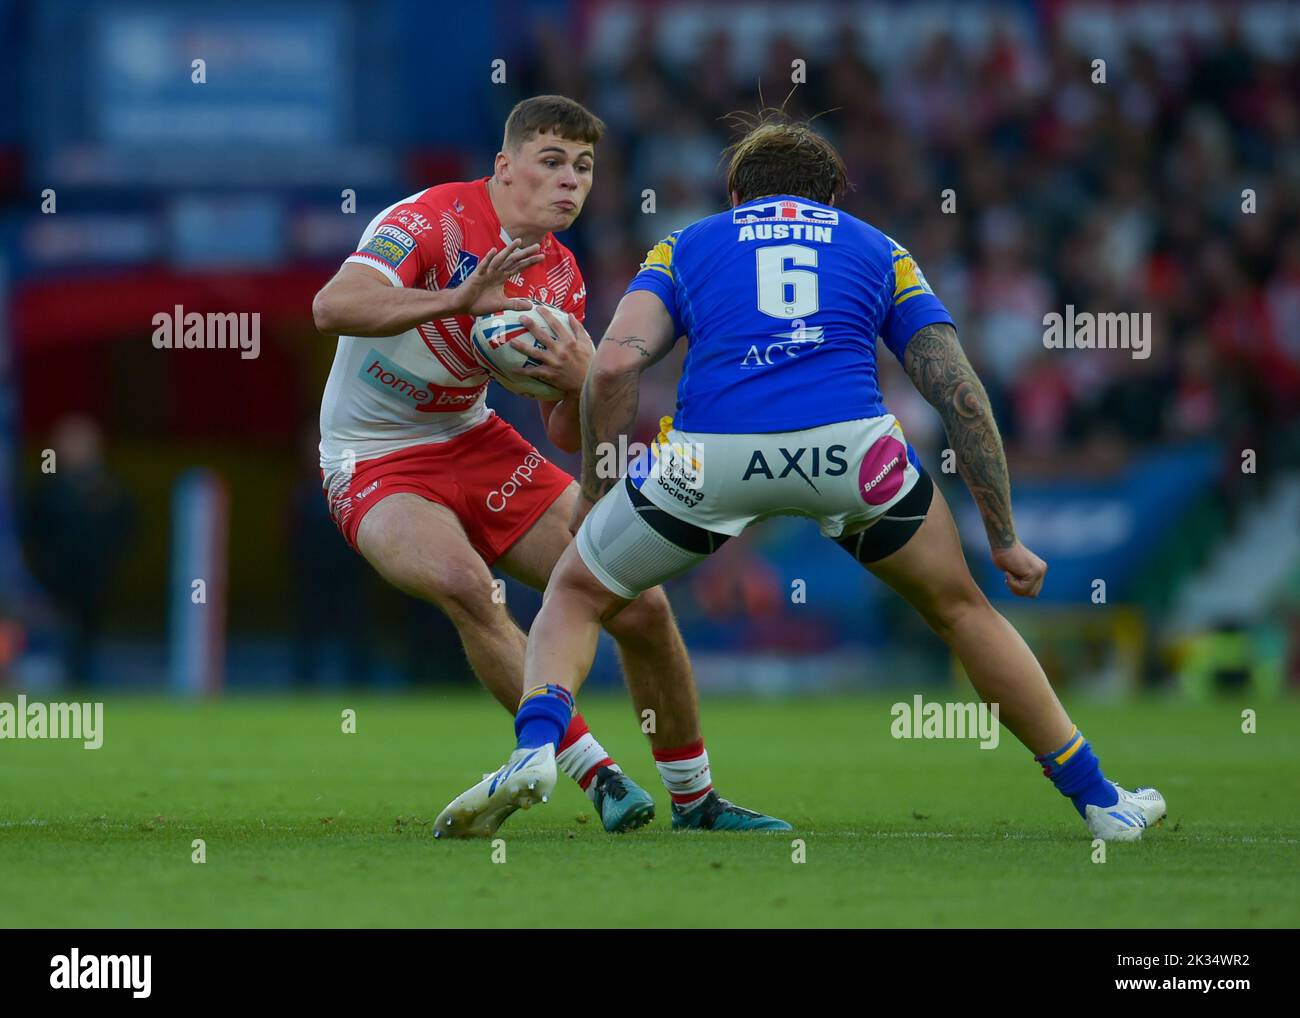 2022 Grand Final, St Helens / Leeds Rhinos Manchester, Old Trafford, Regno Unito 18:00 Kick Off €24.09.2022 Credit: Craig Cresswell/Alamy Live News Foto Stock